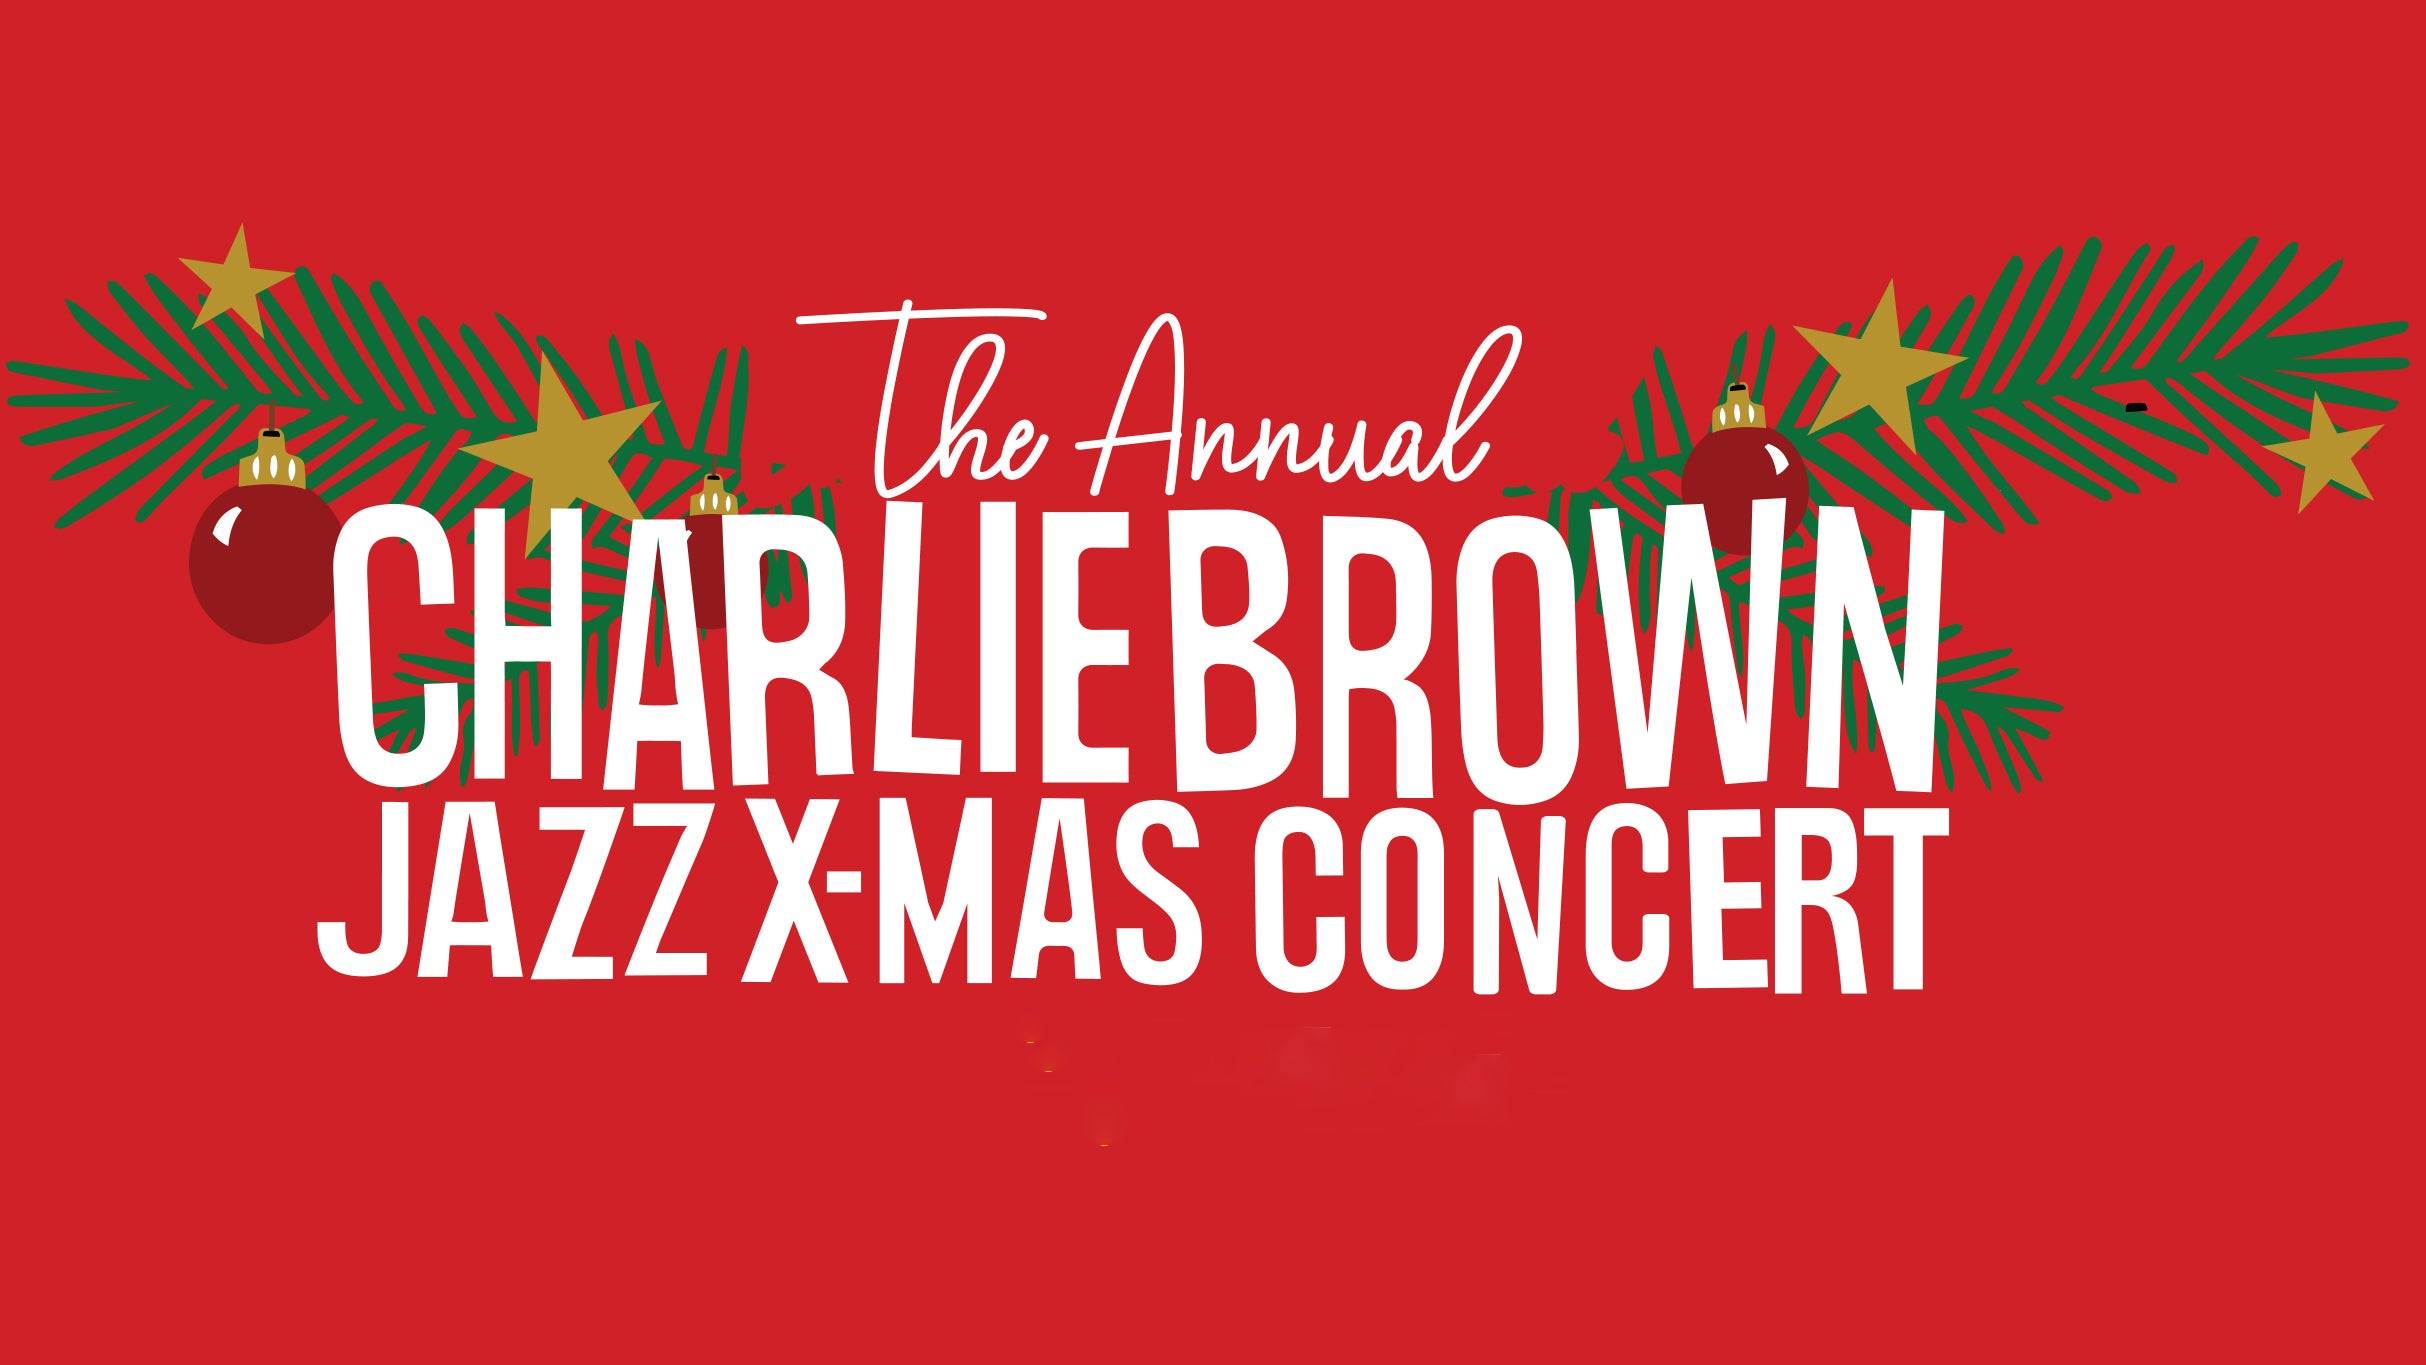 A Charlie Brown Jazz Christmas in Mobile promo photo for Artist presale offer code